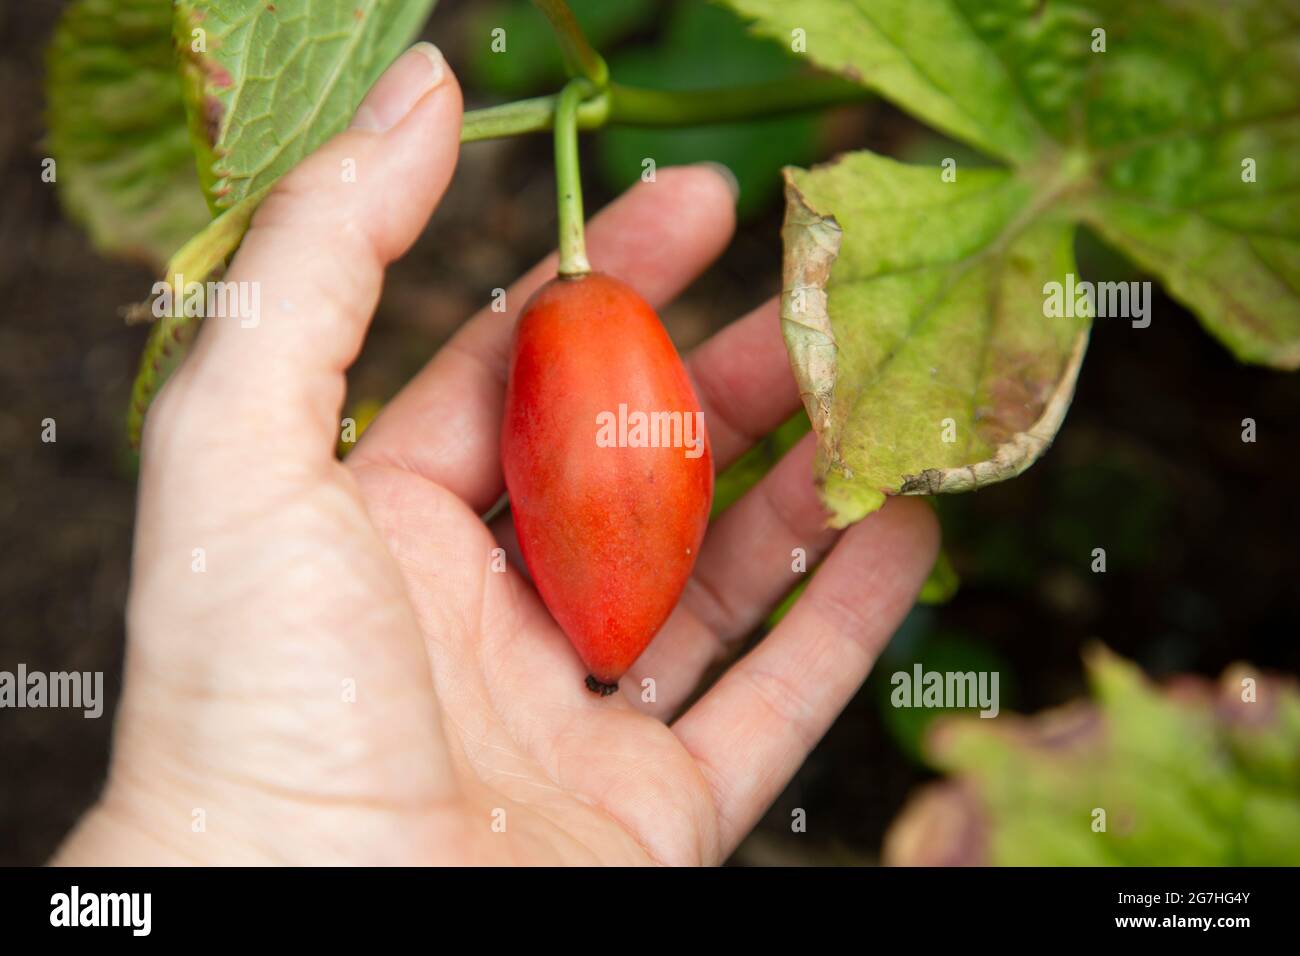 The ripe, red fruit of sinopodophyllum - an herbaceous perennial plant in the family Berberidaceae commonly known as Himalayan may apple. The root and Stock Photo